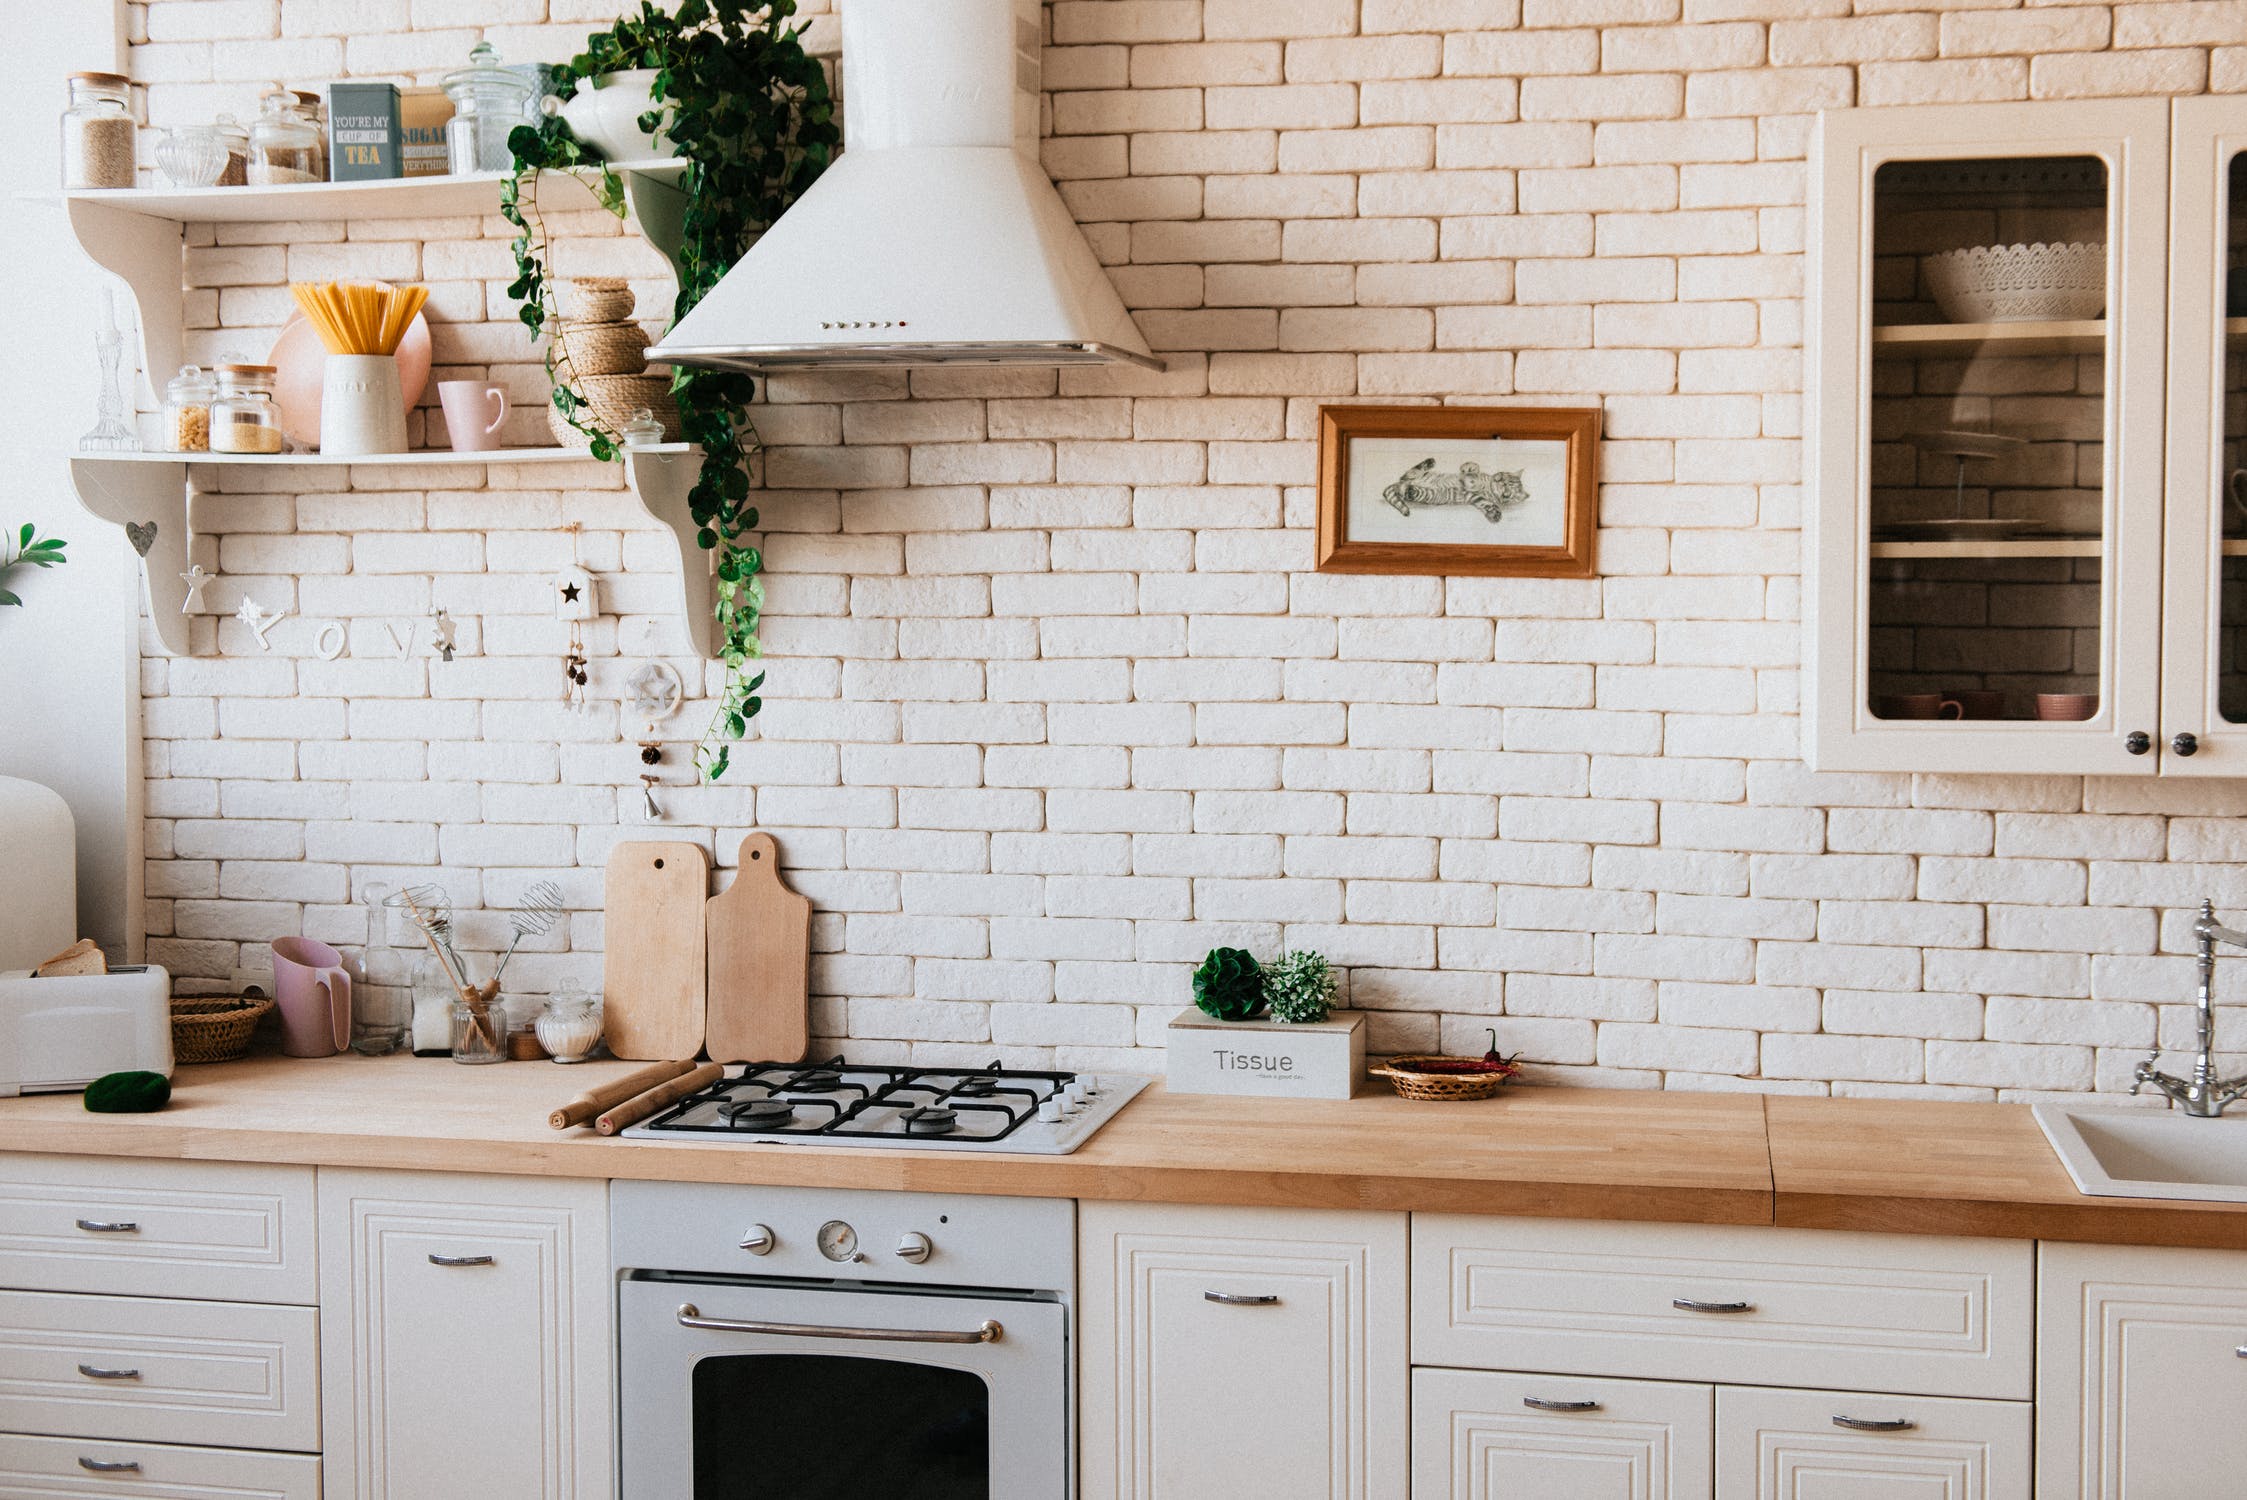 Tidy your home kitchen for house viewings